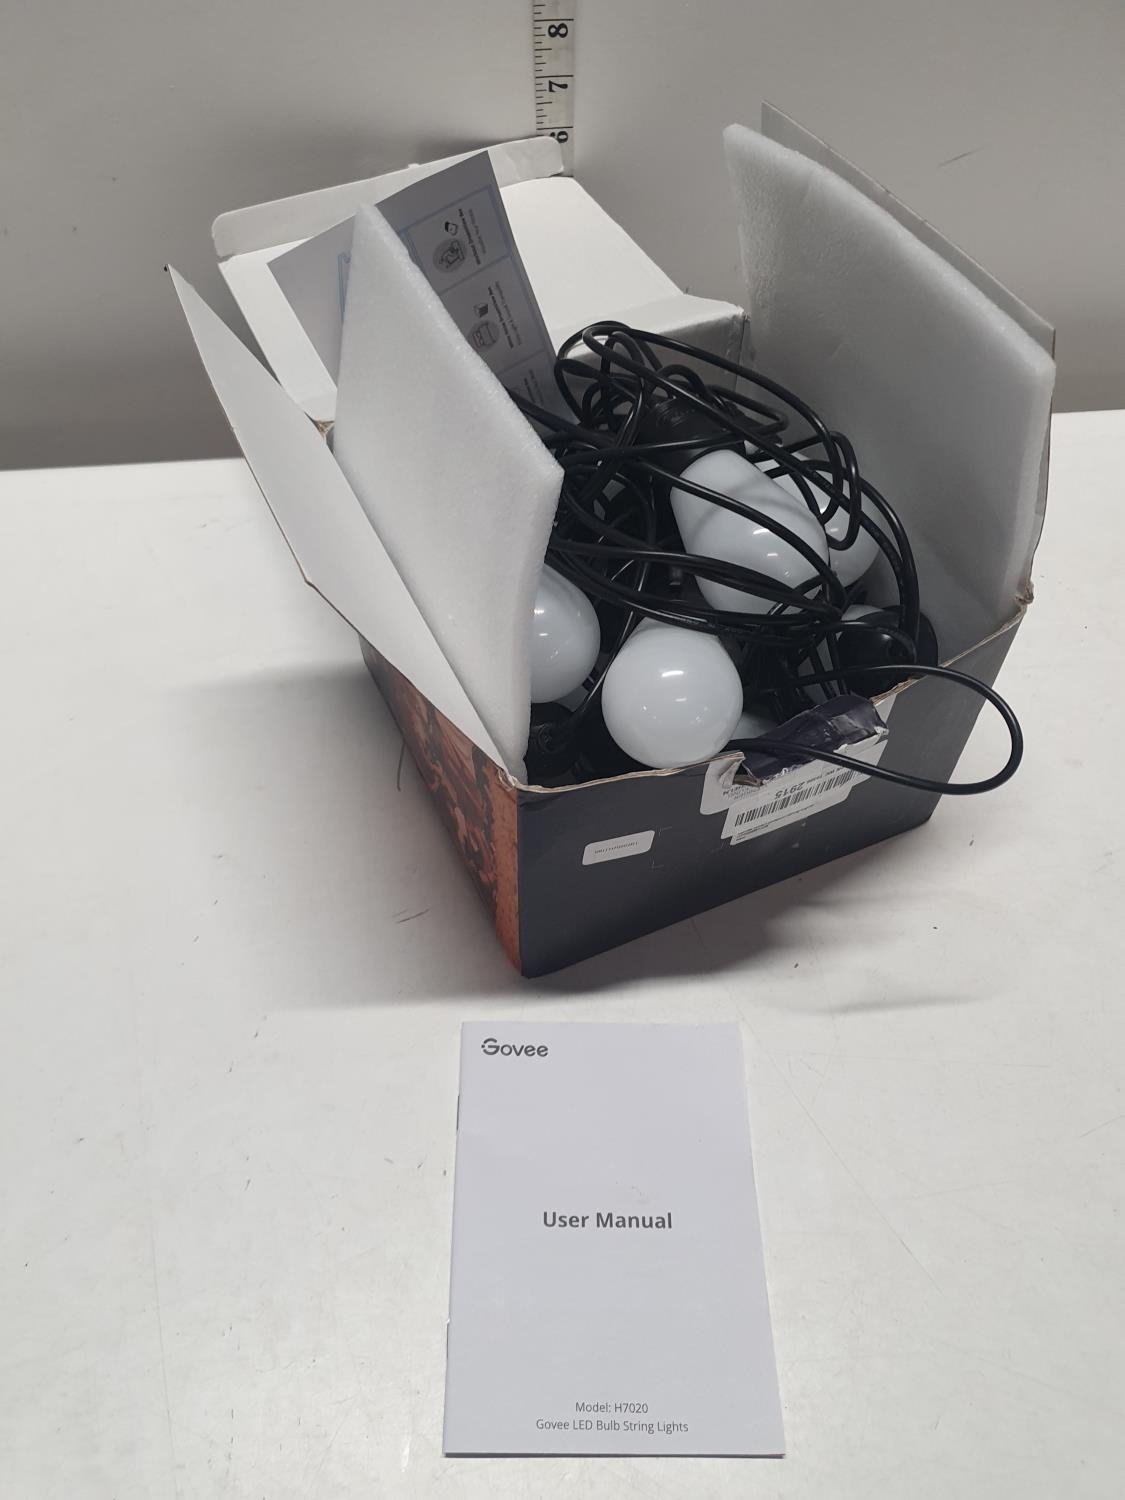 A boxed Govee bulb string lights (untested)